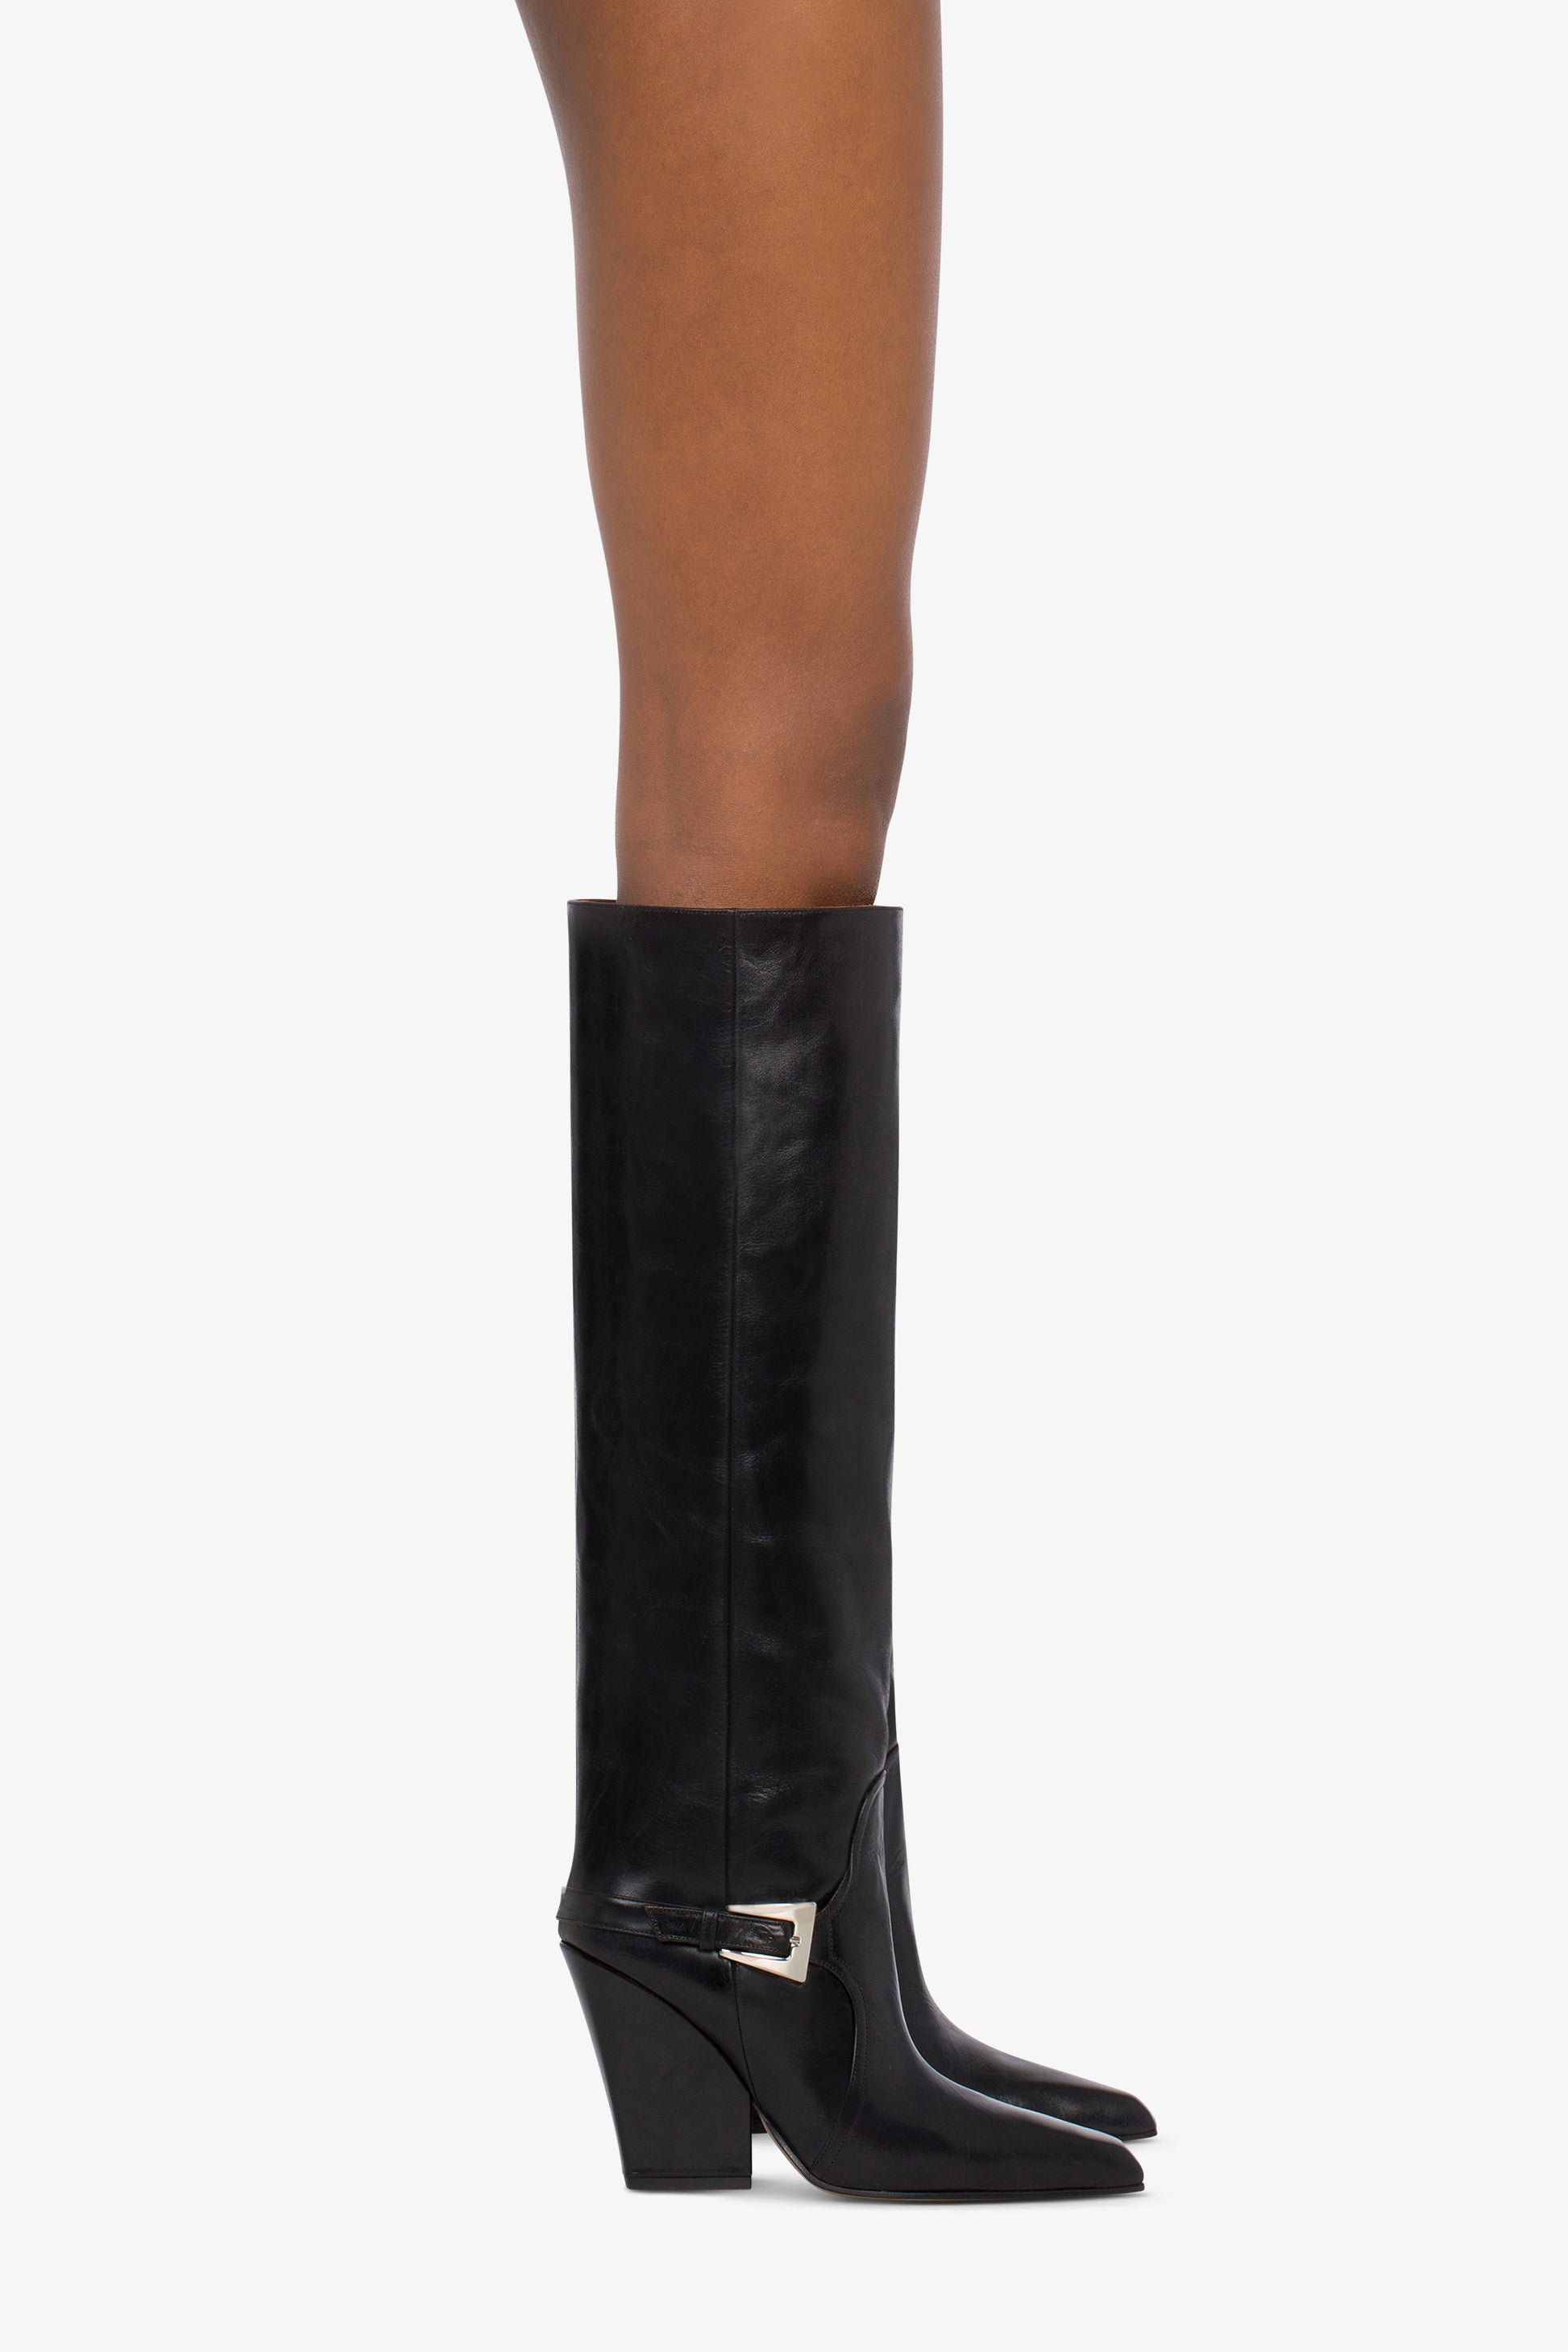 Tall, knee-high boots in shiny black vintage leather - Producto usado